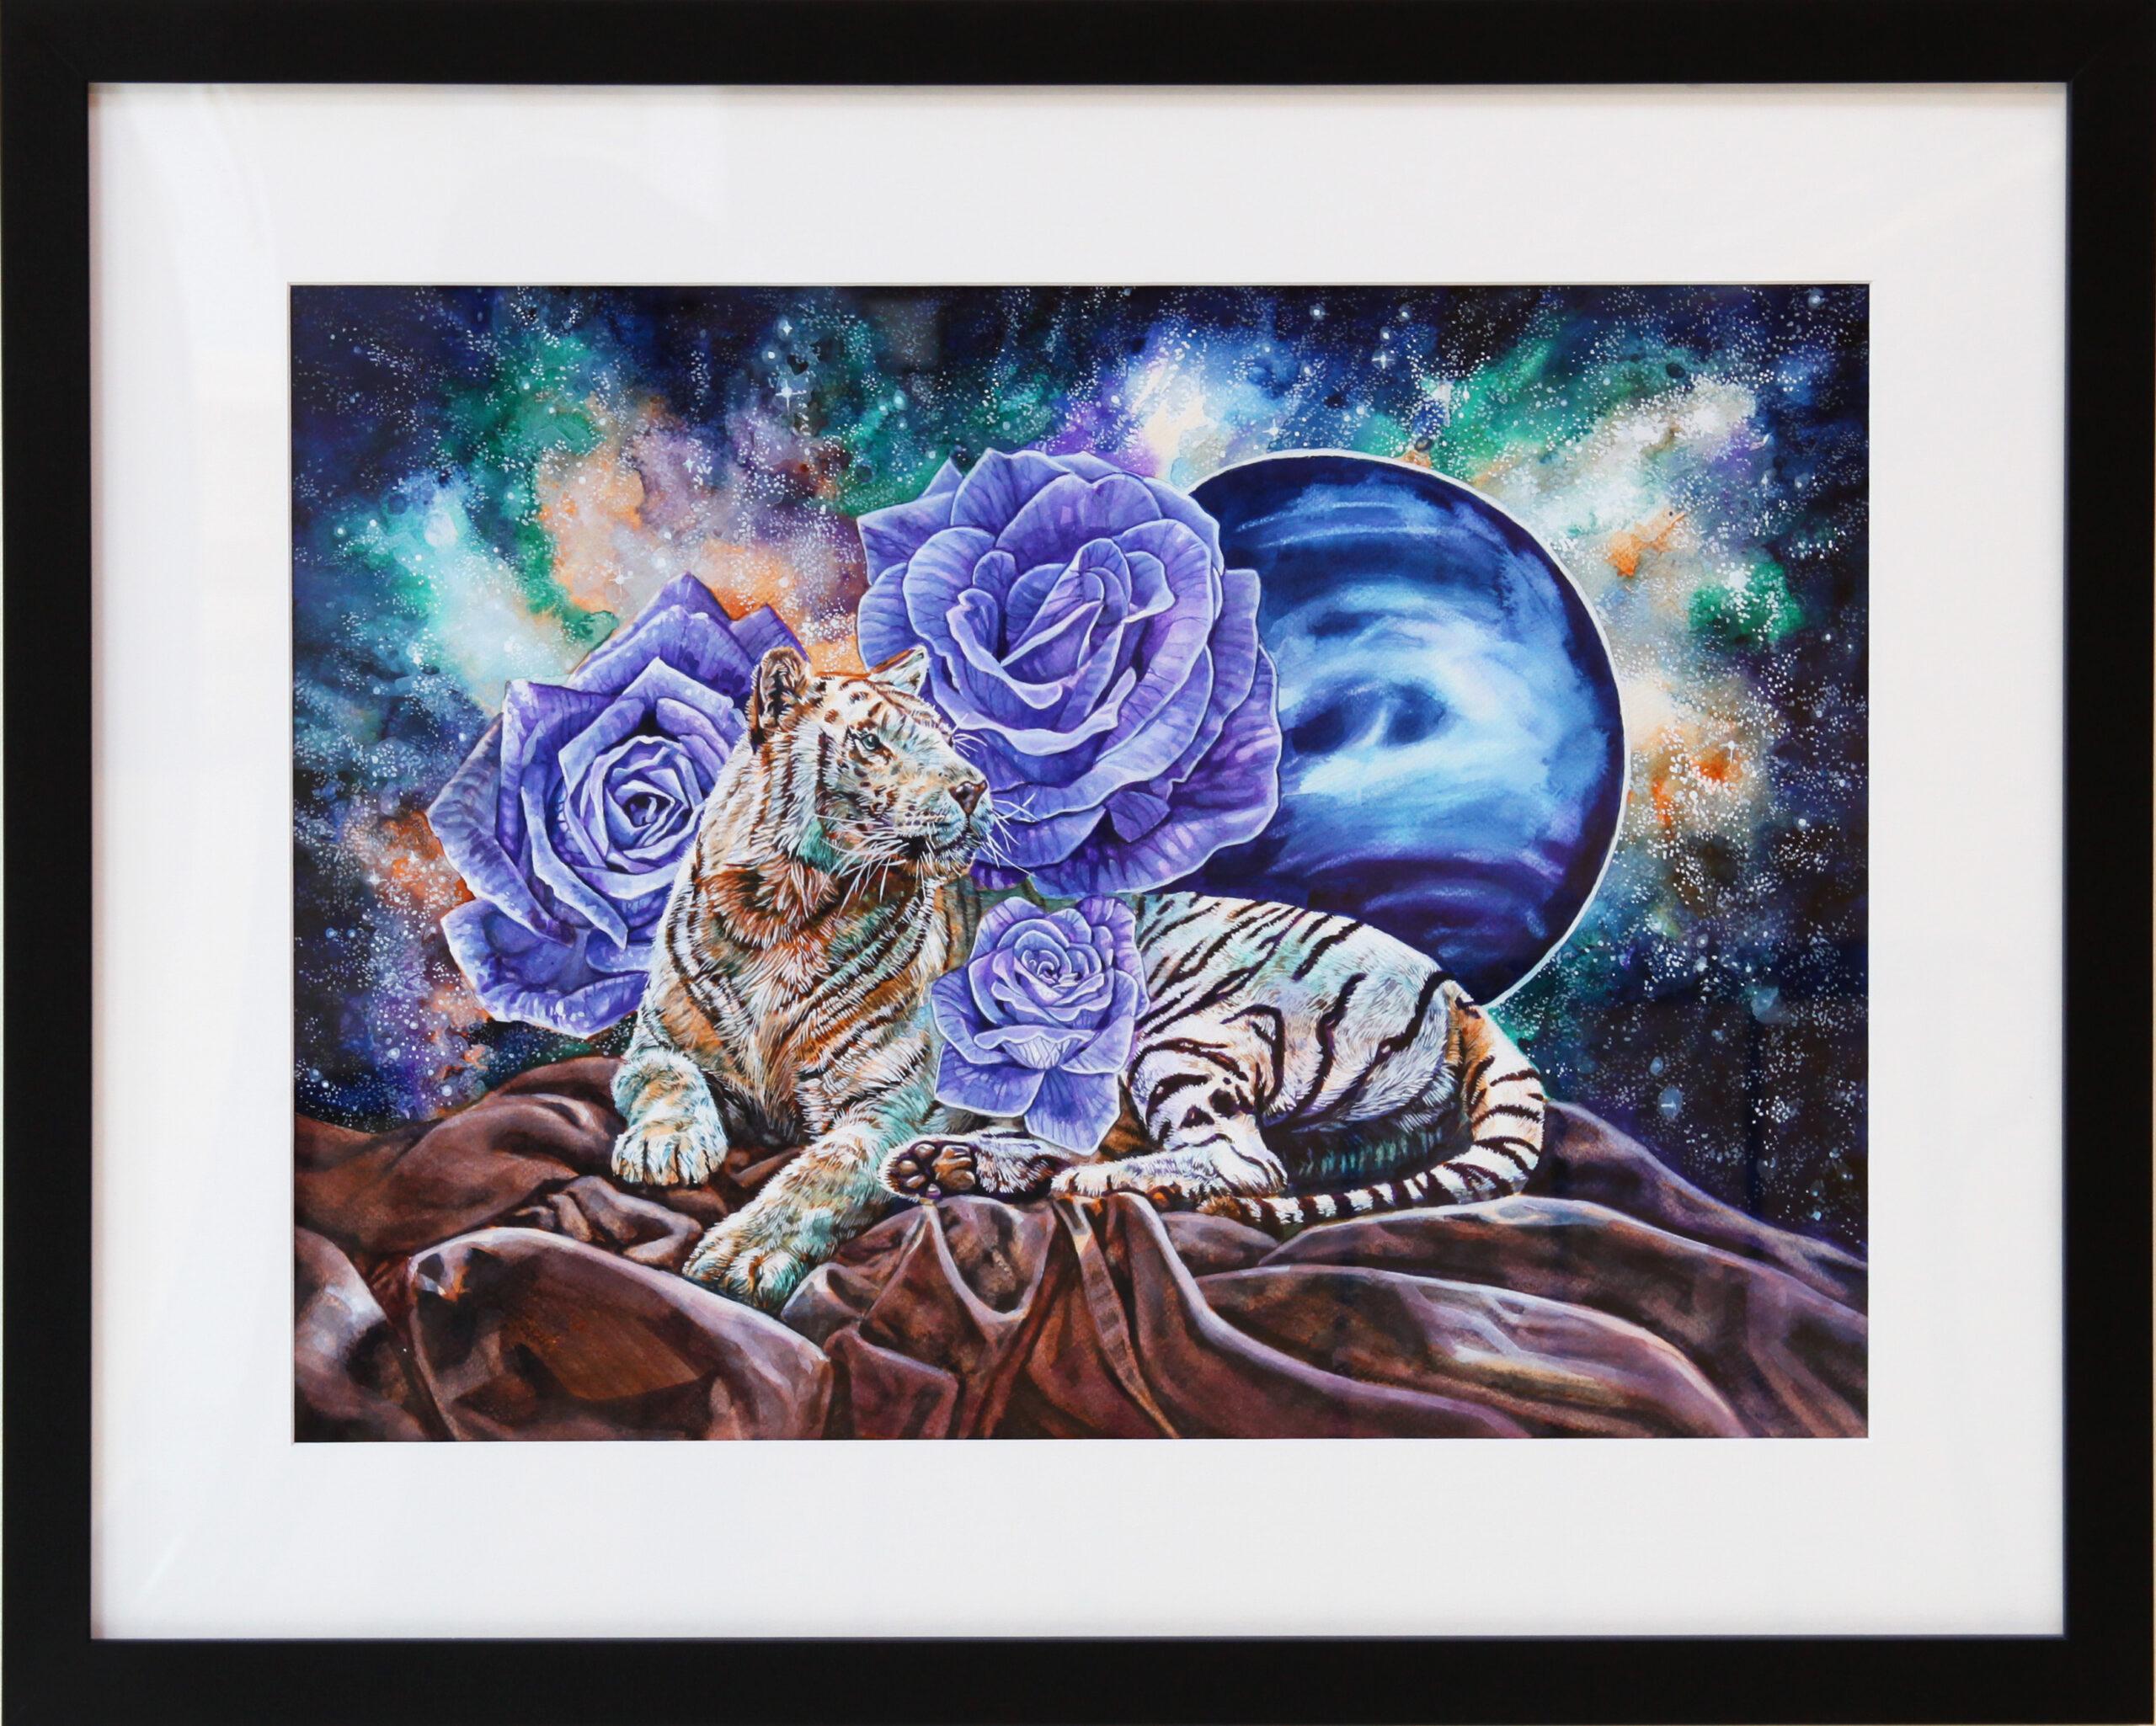 Kelsey Worth Figurative Painting - A Surreal Watercolor Painting, "Music of the Spheres"